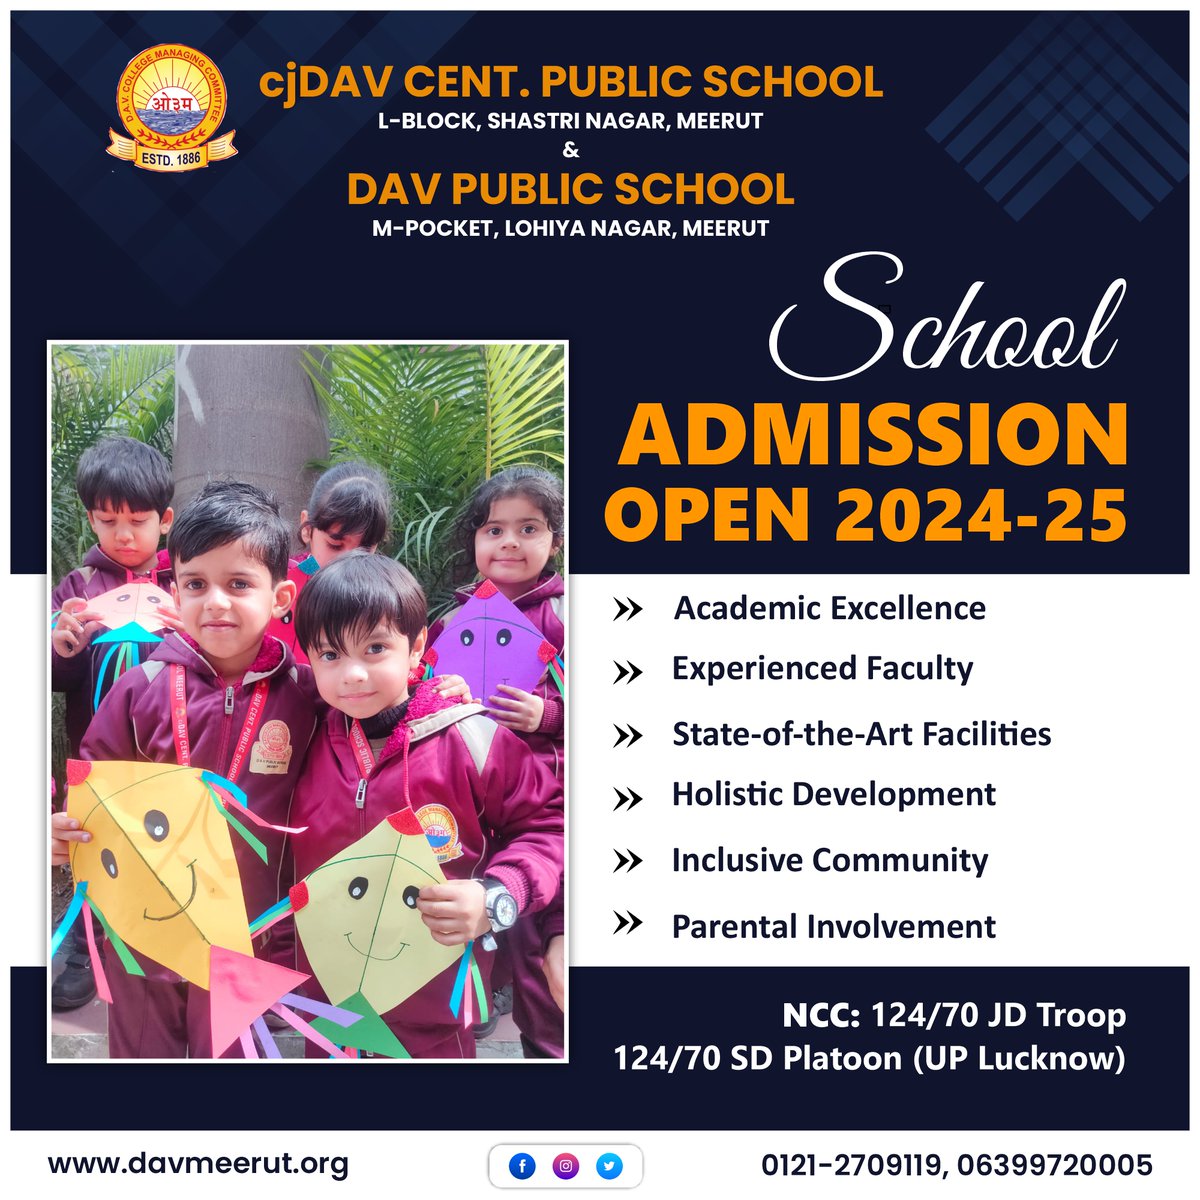 Invest in Your Child's Bright Tomorrow – Embark on an extraordinary journey as CJDAV Centenary Public School, Meerut invites applications for new admissions in classes Nursery to IX & XI, cultivating a unique educational experience for the session 2024-25. #CJDAV #CJDAVMeerut